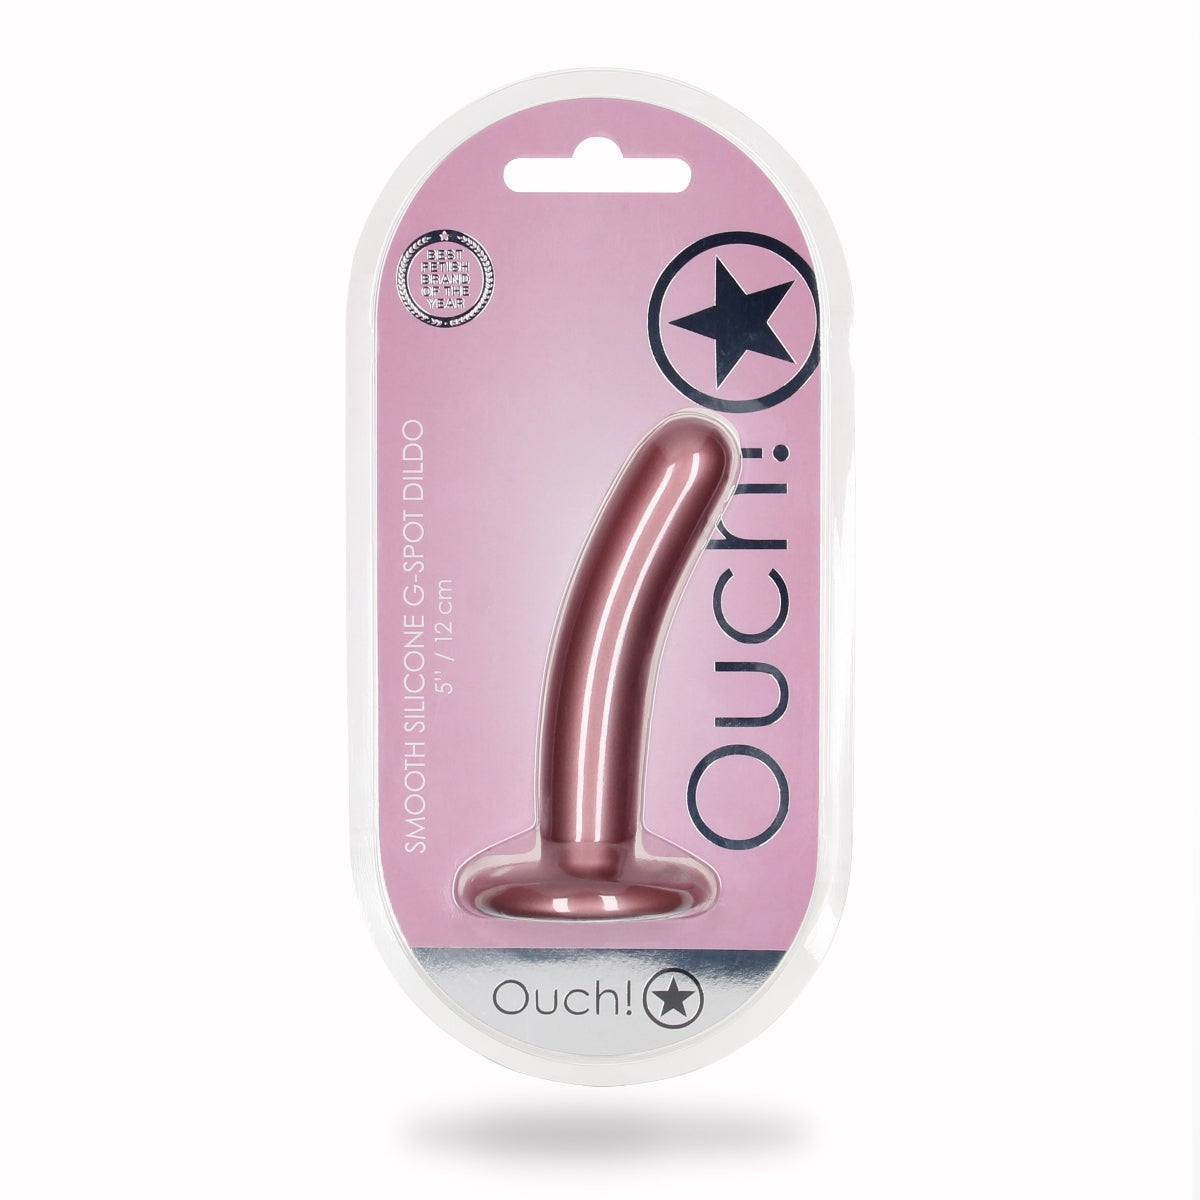 Ouch Smooth Silicone G-Spot Dildo Metallic Rose 5 Inch